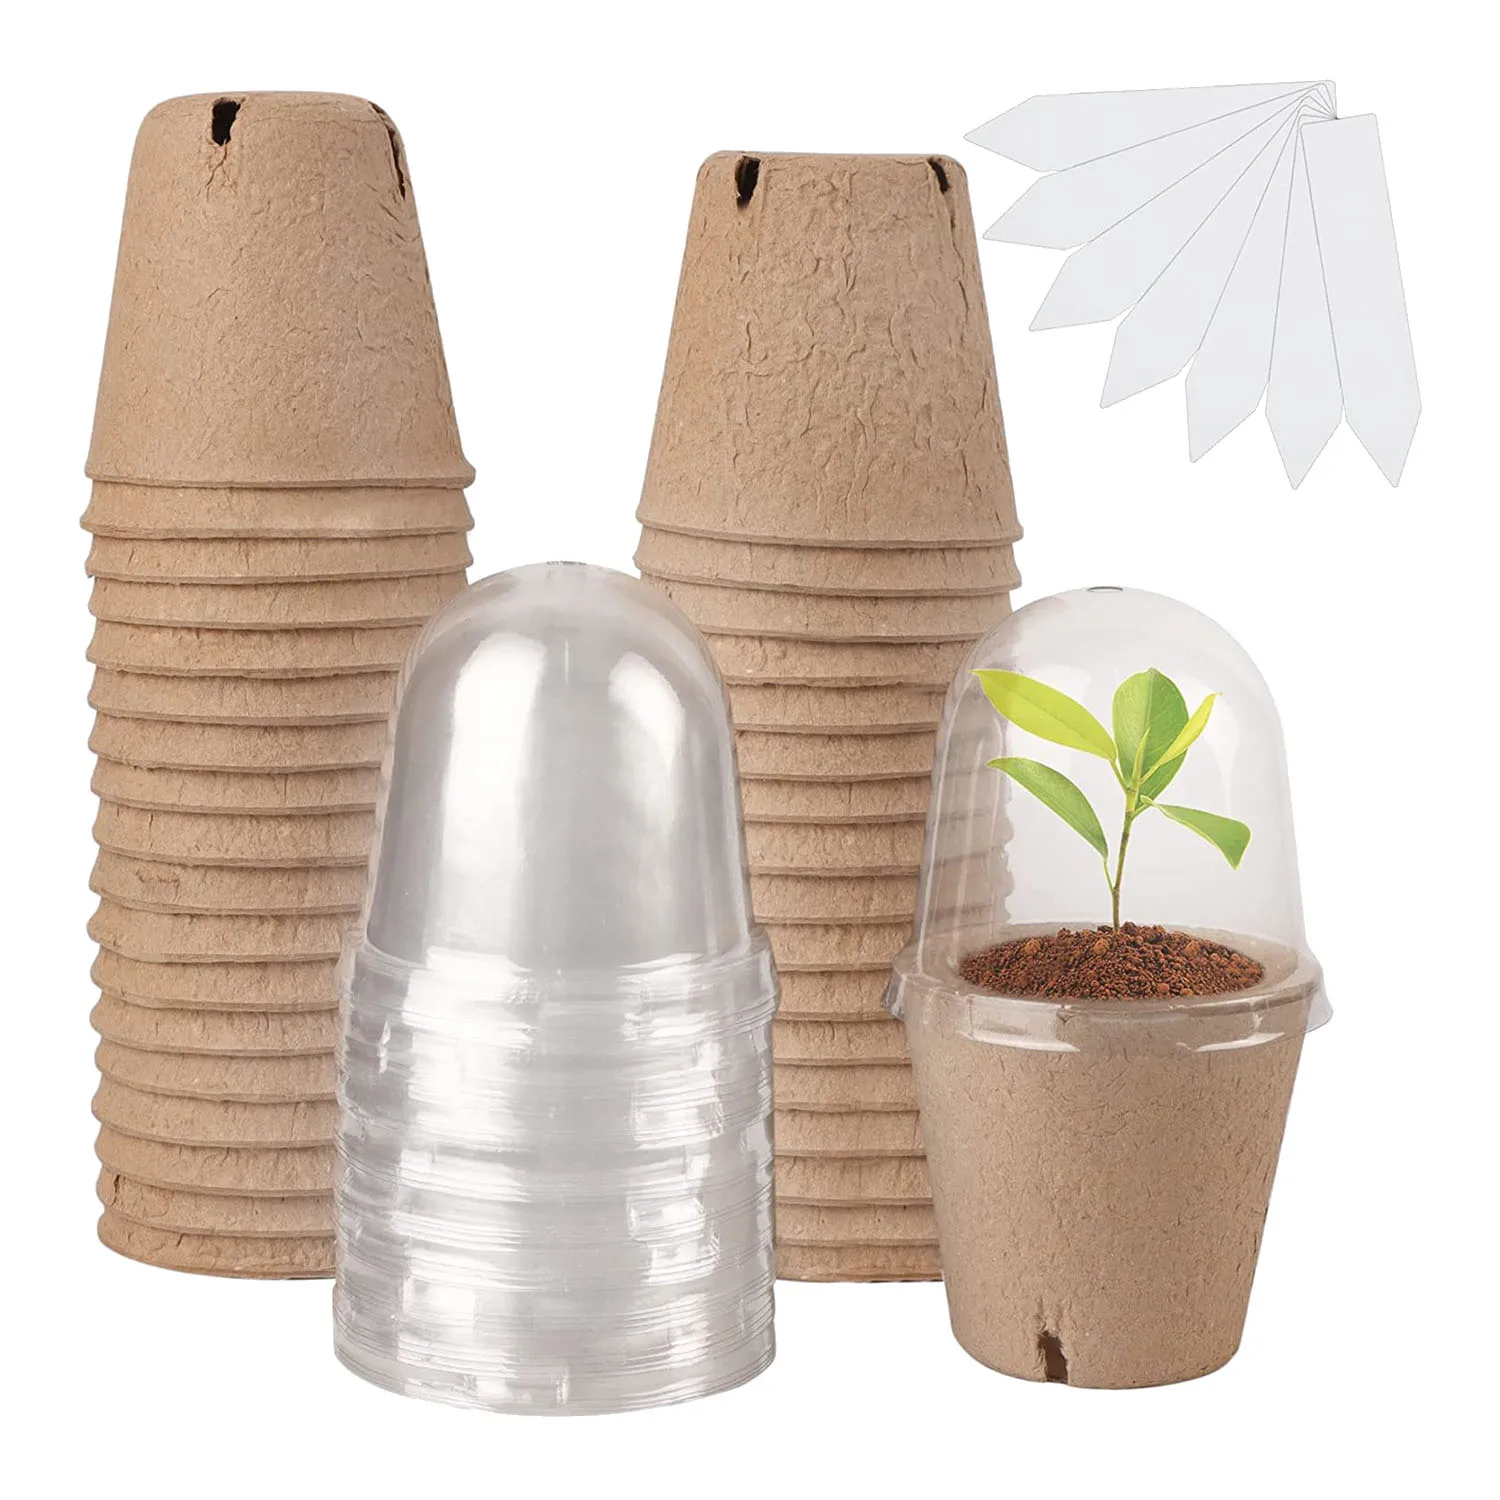 

36 Set Plant Nursery Pots with Humidity Dome Seed Starter Pots Biodegradable Peat Pots Seedlings Planting Pots